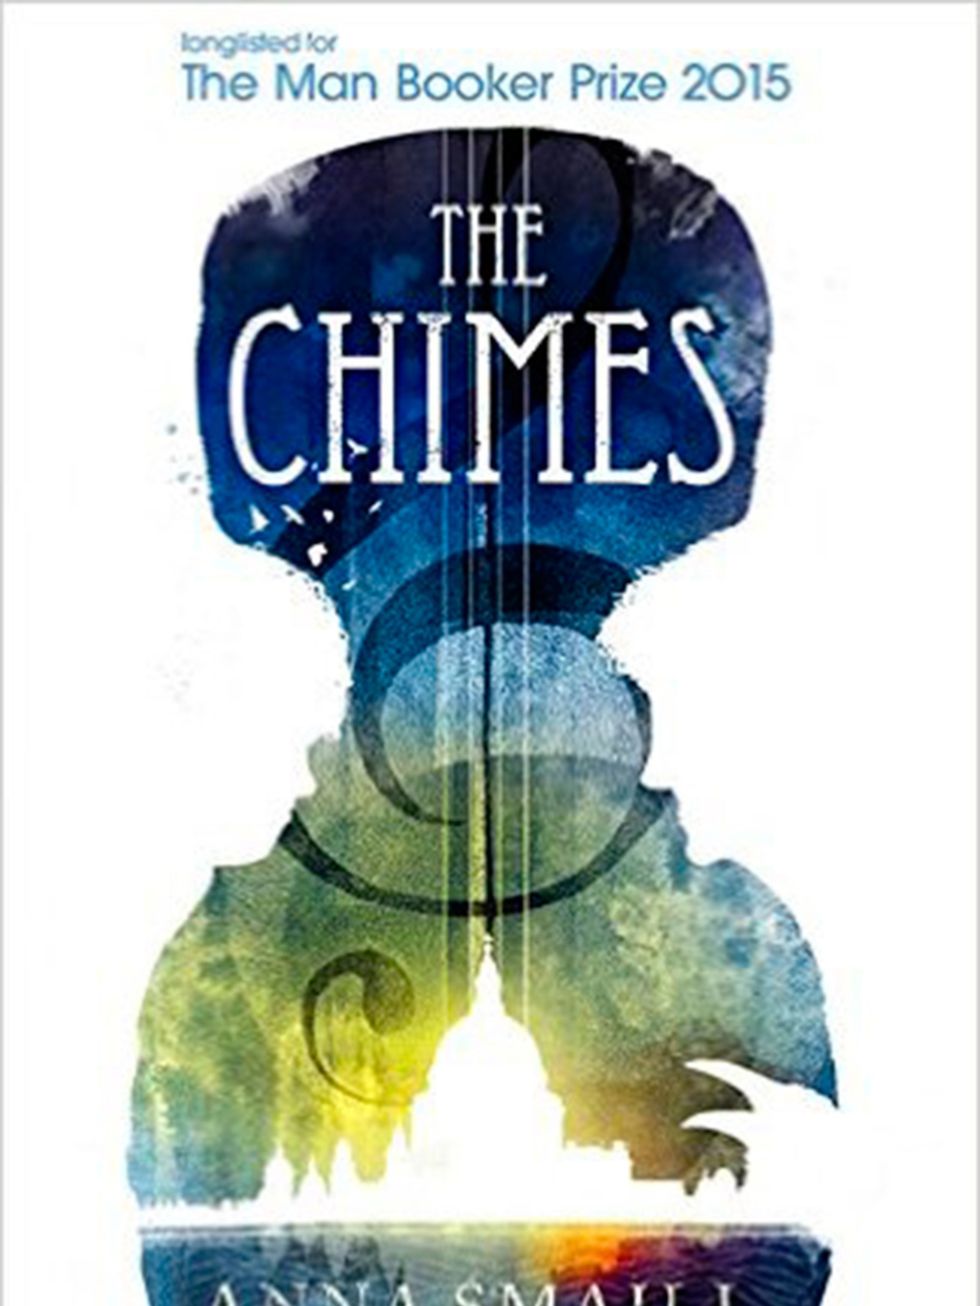 <p><strong>4. The Chimes by Anna Smaill (Sceptre)</strong></p>

<p>If youre after something a bit more challenging this is one of the top literary novels of the year. Set in a world where music has replaced the written word its a lyrical, entrancing sto